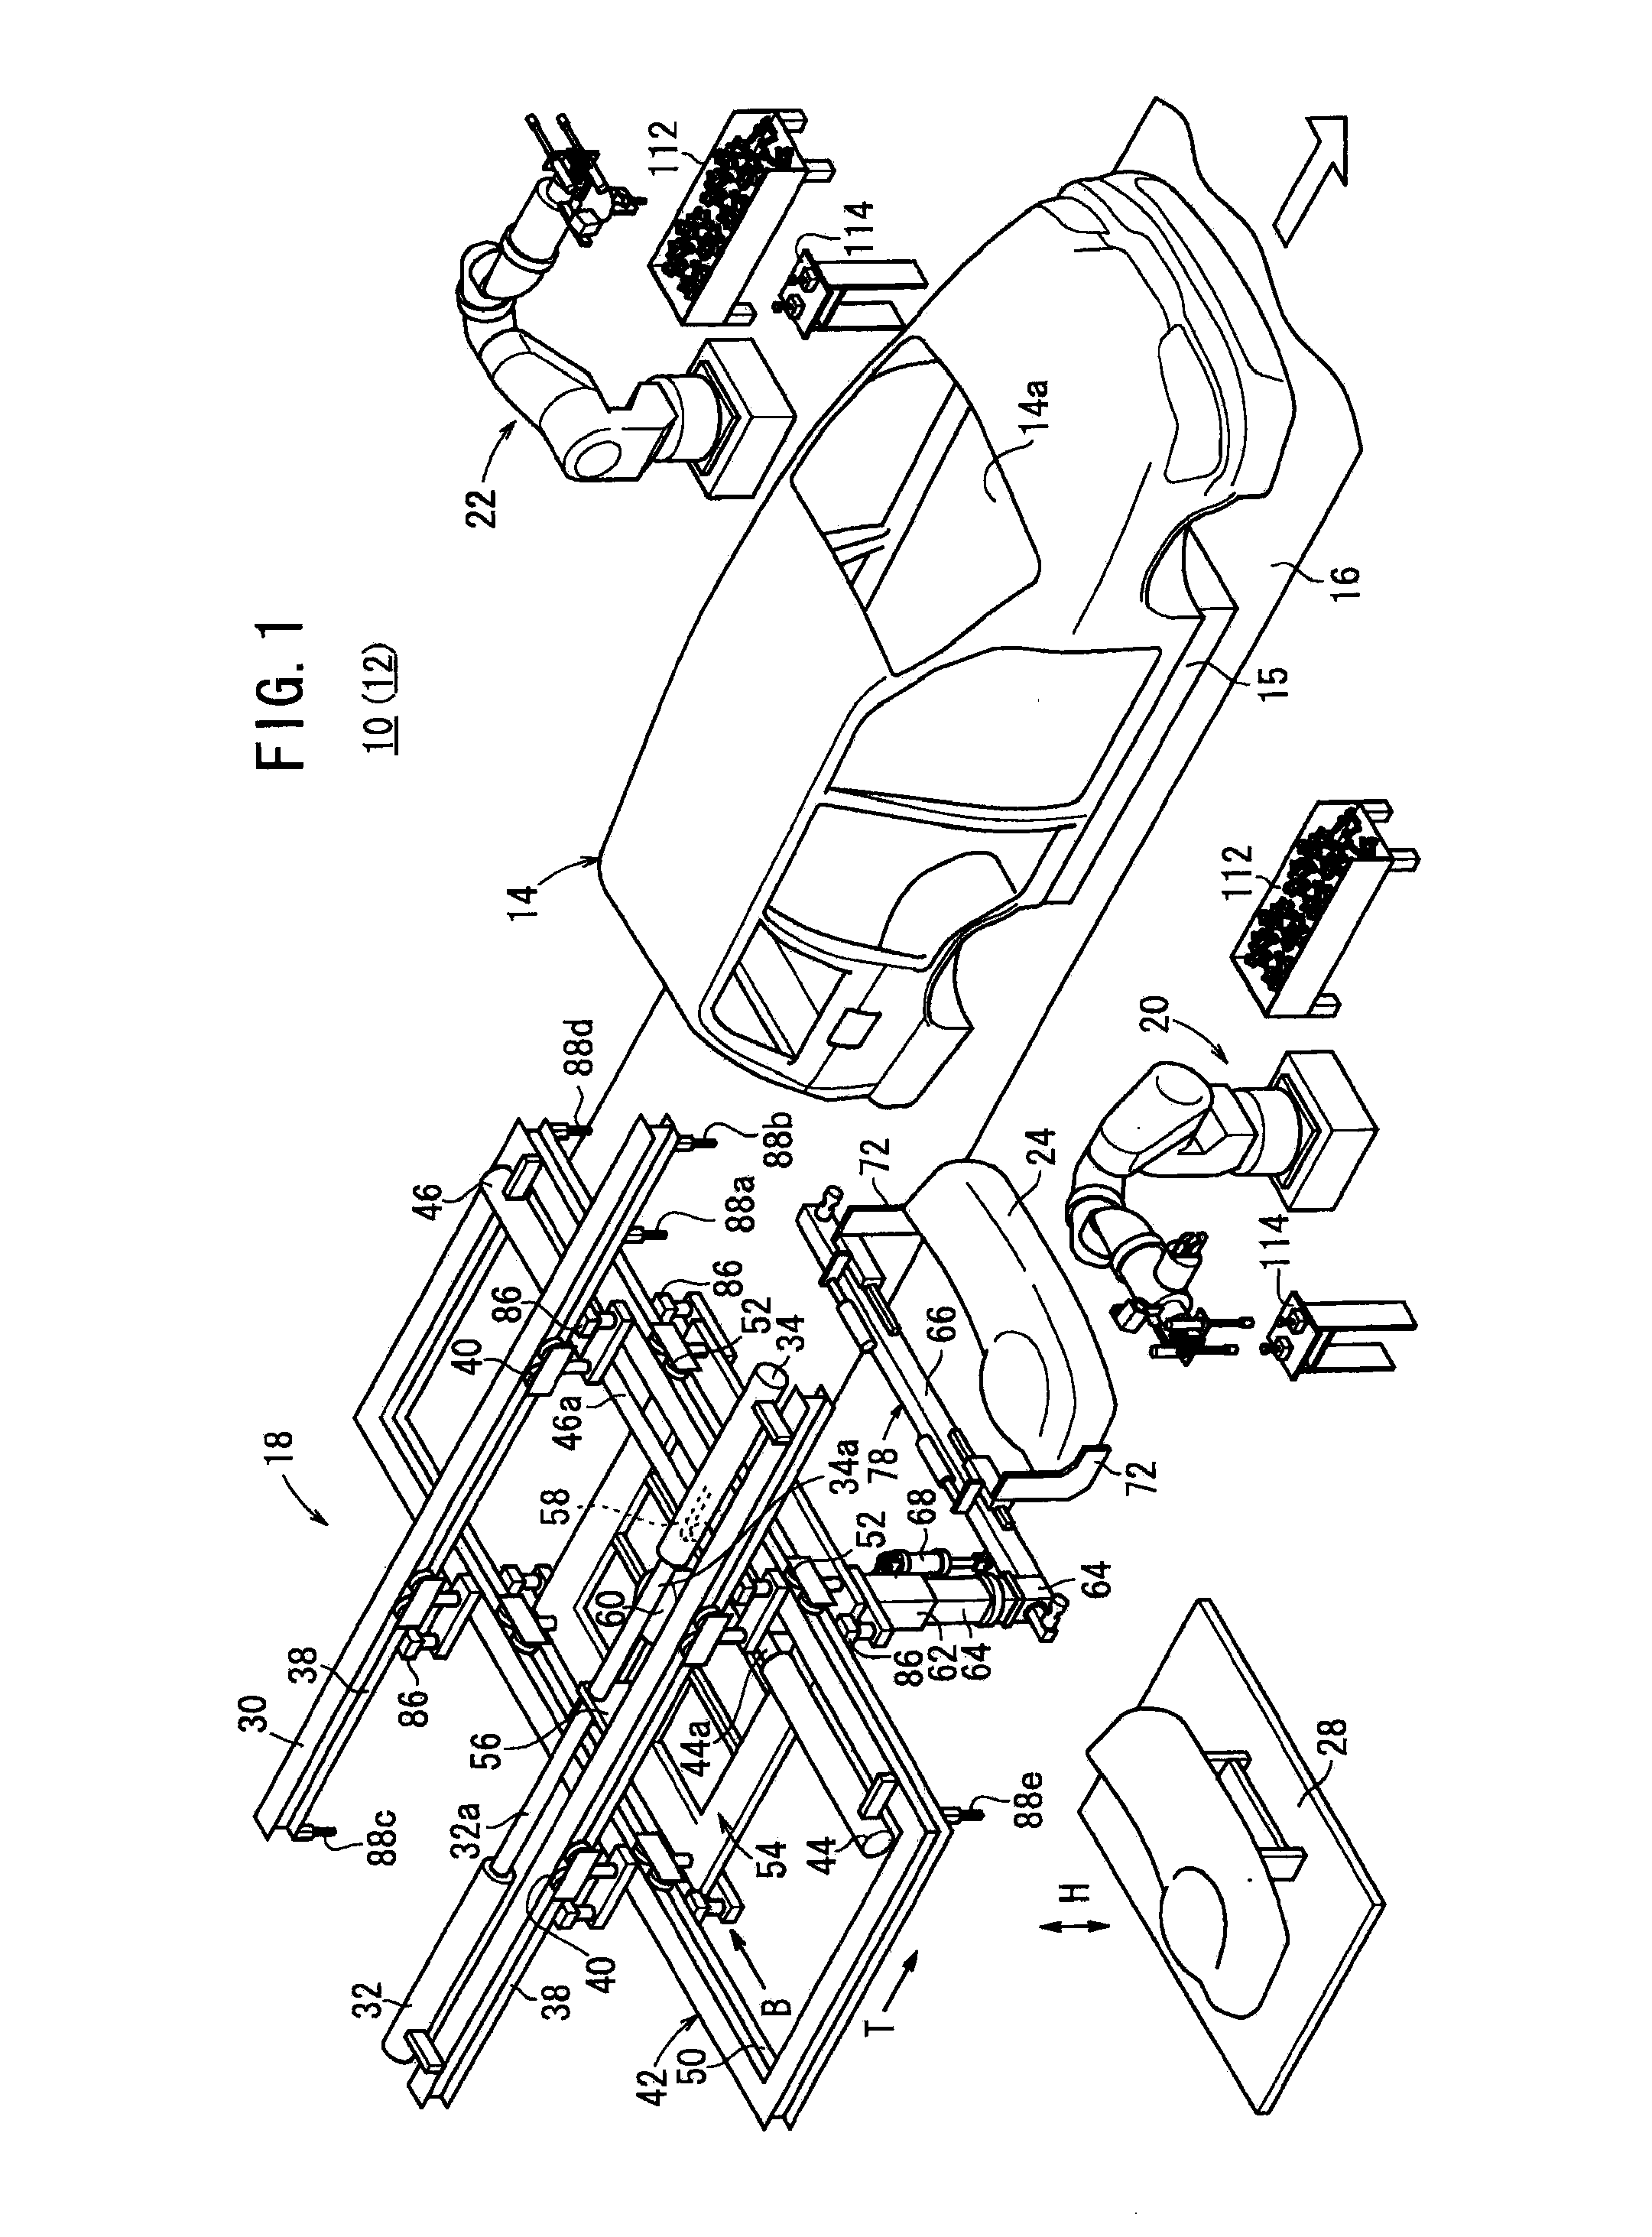 Device and method for mounting vehicle instrument panel